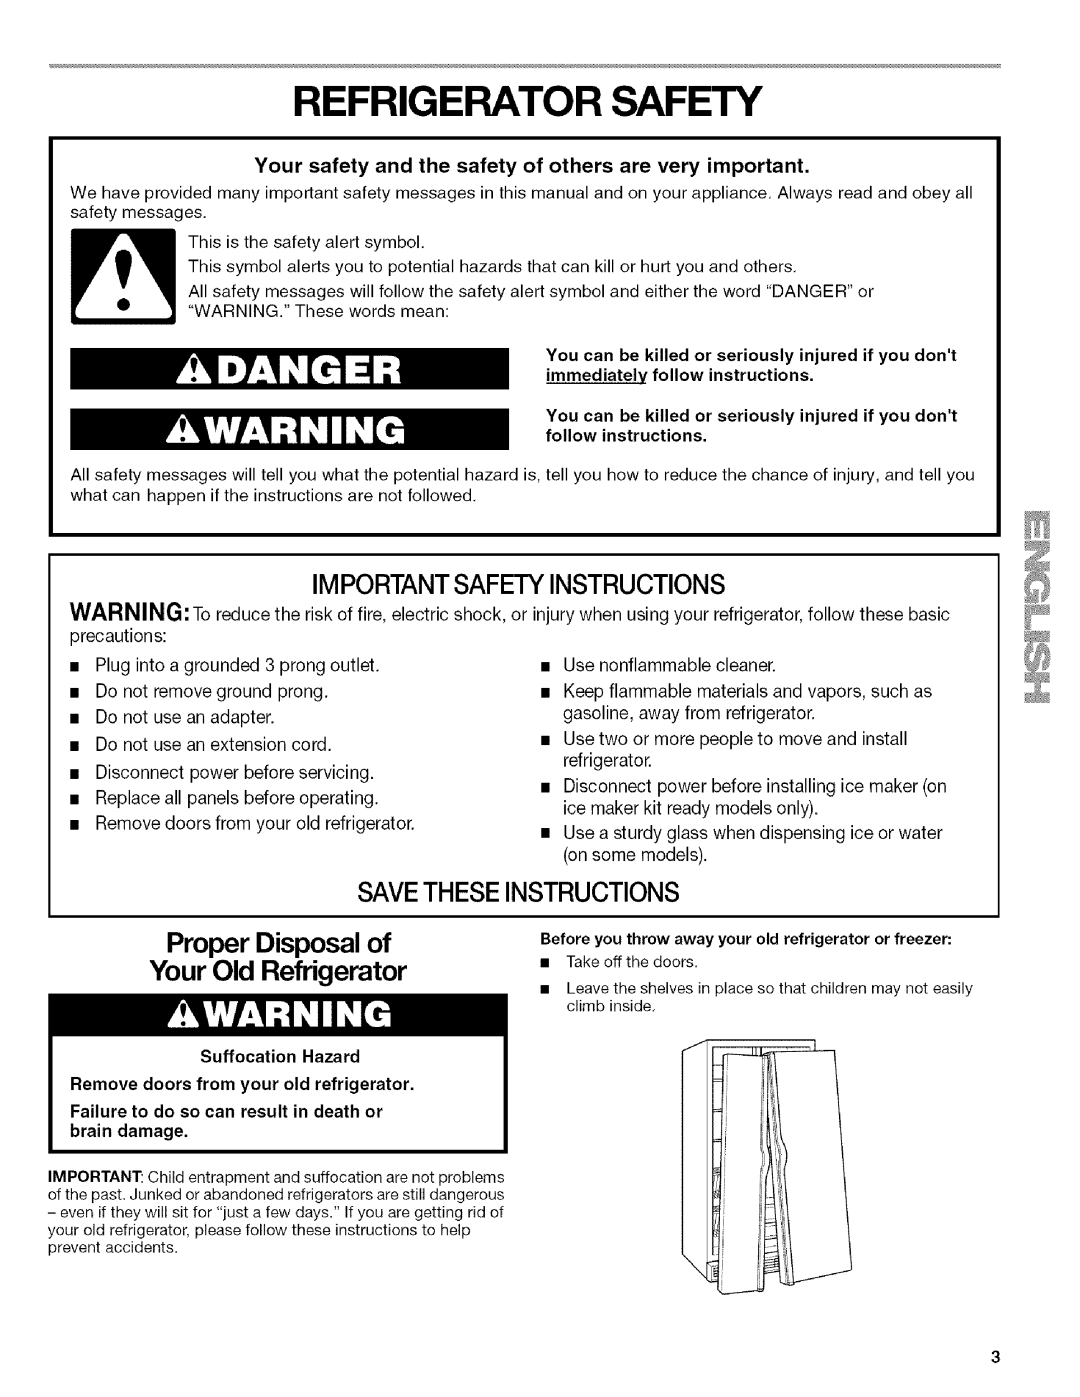 Kenmore 2205960 manual Refrigerator Safety, Savetheseinstructions, Proper Disposal of Your Old Refrigerator 